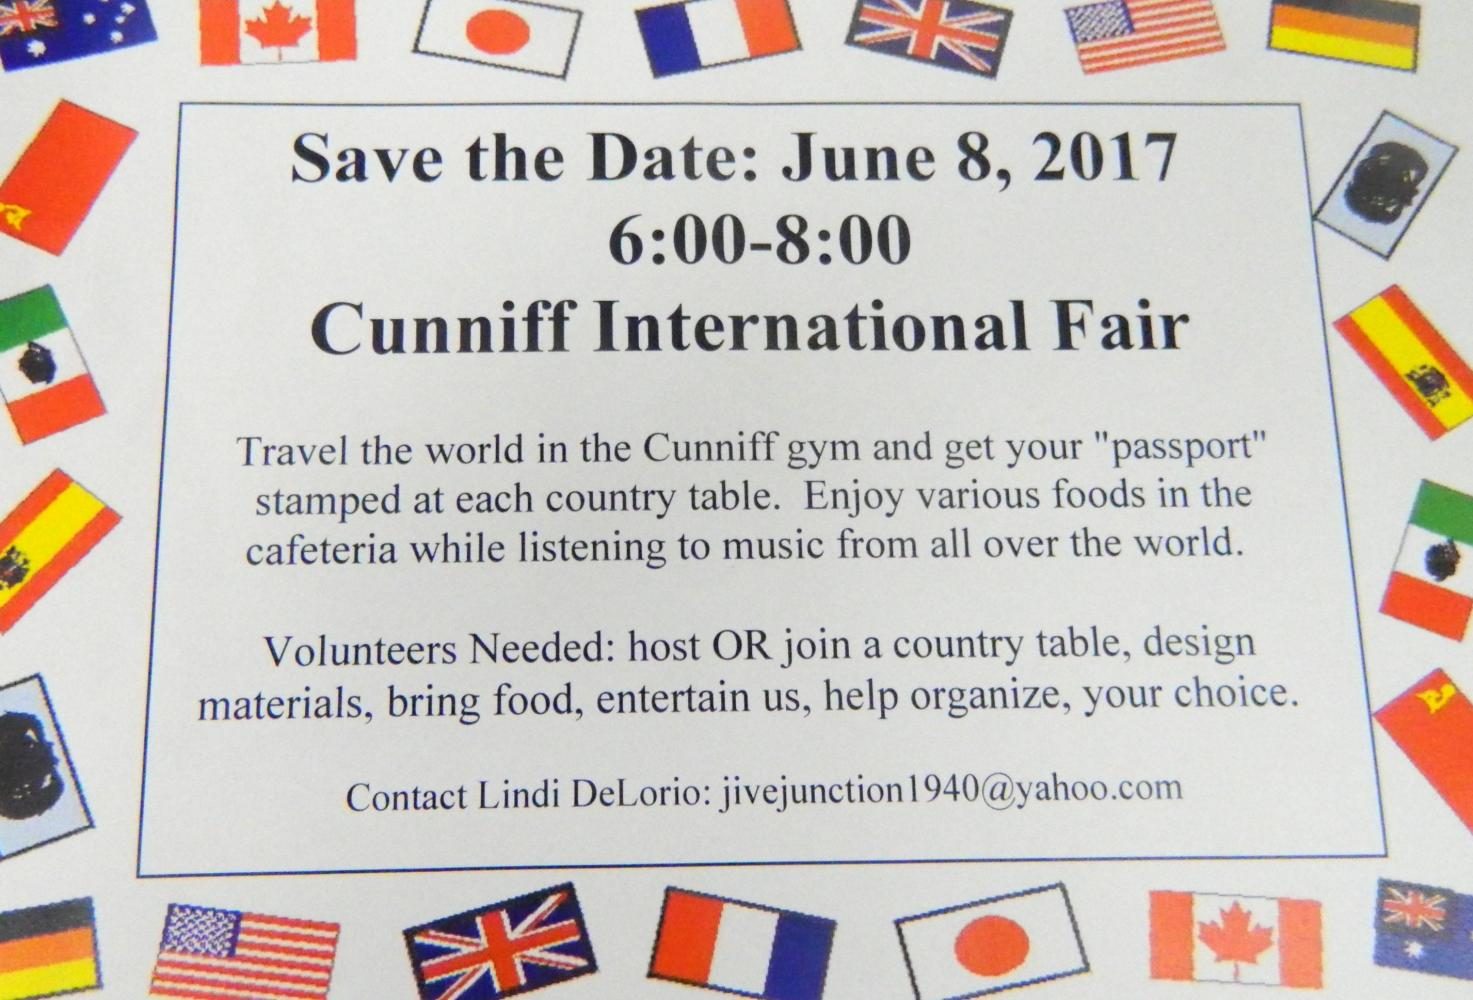 People will be coming from around the world to the first International Night at Cunniff Elementary School in Watertown, Mass., on Thursday, June 8, 2017.